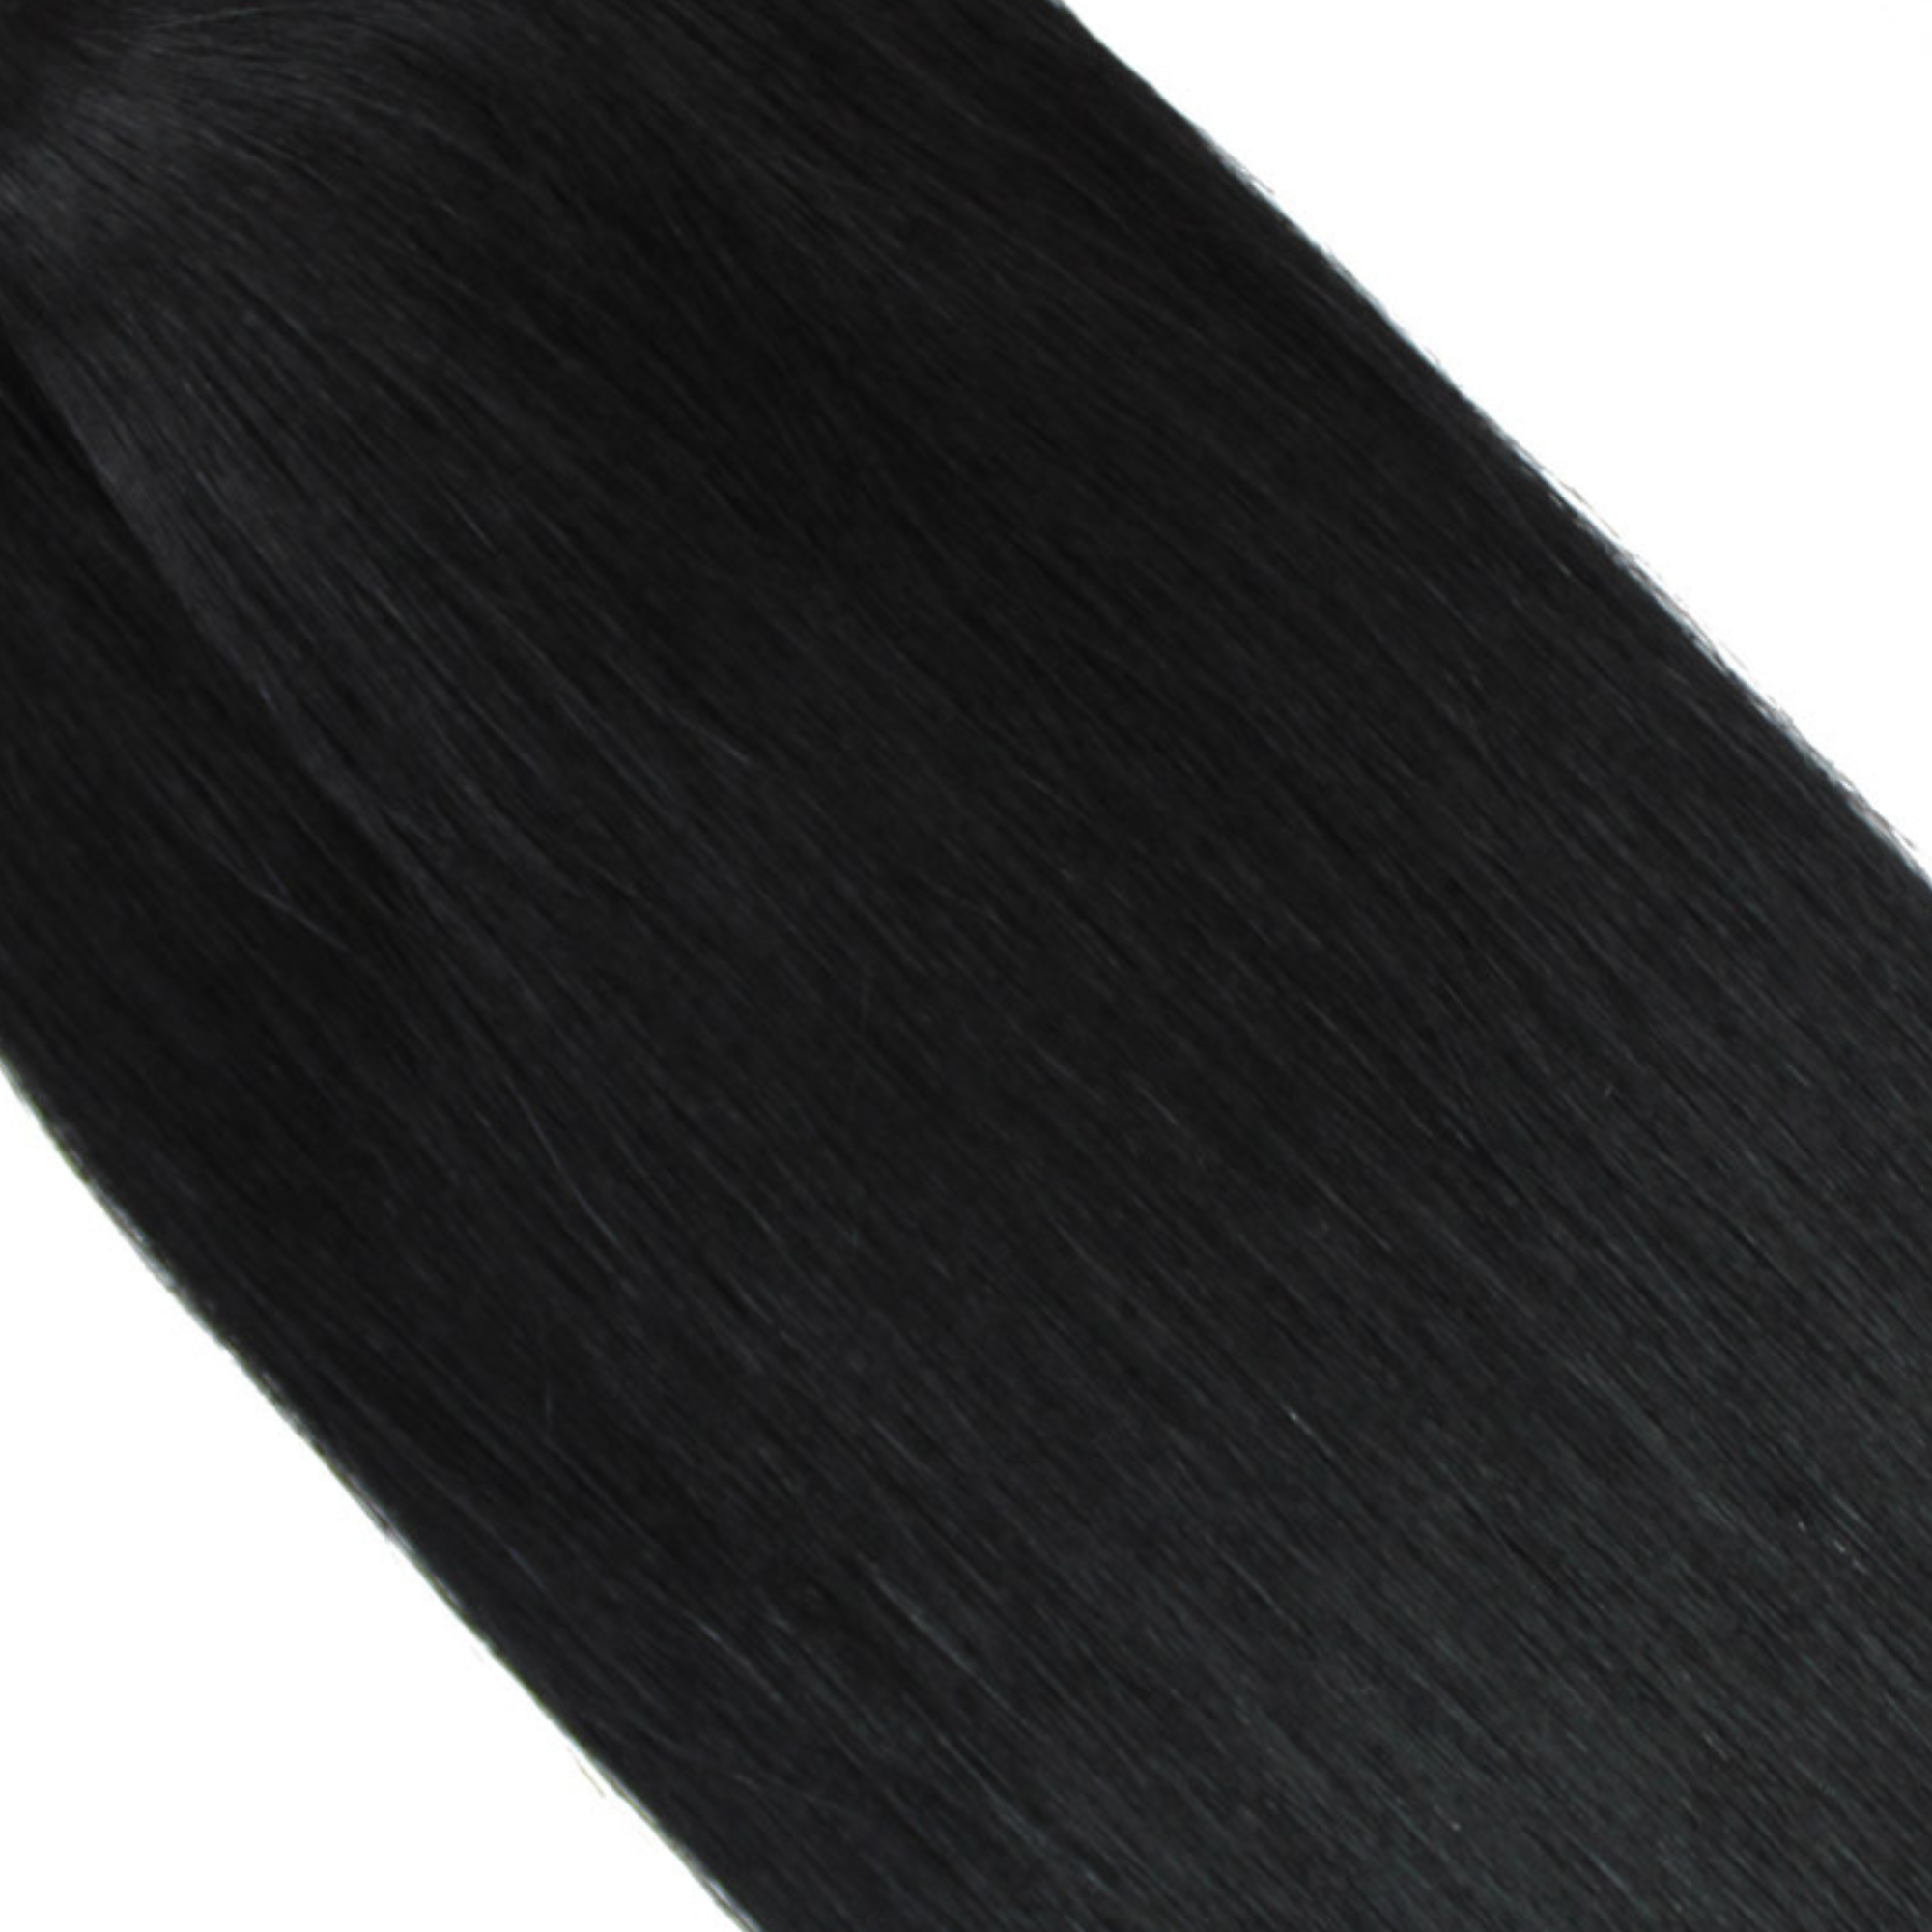 "hair rehab london 18" length 120 grams weight original clip-in hair extensions shade titled jet black"